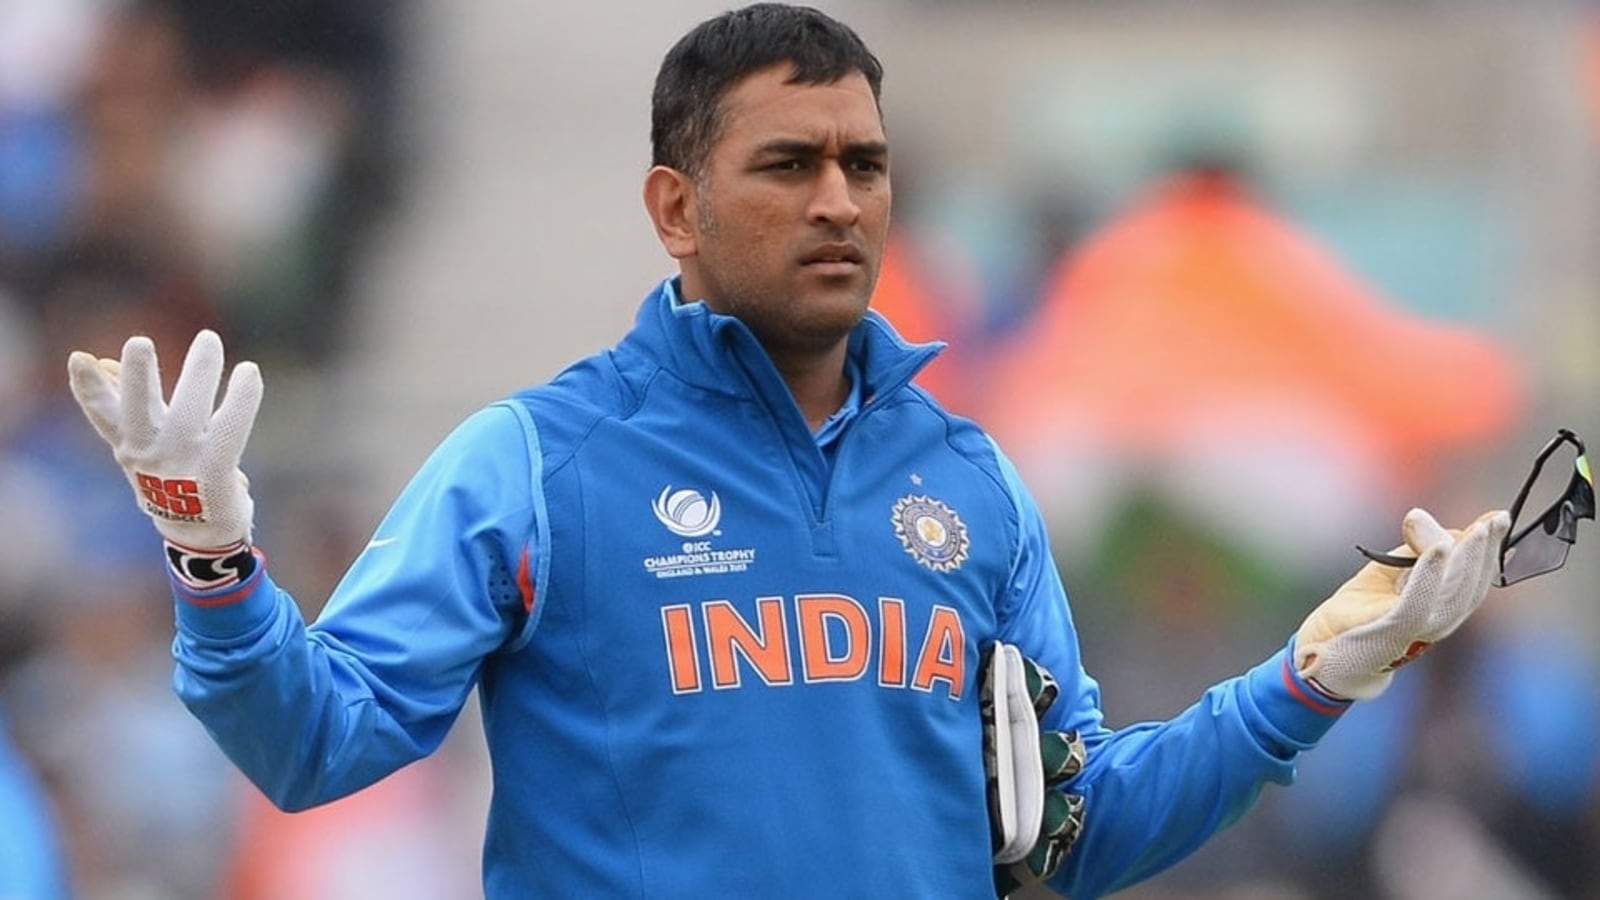 Ms Dhoni To Mentor Indian Team For The T20 World Cup Bcci Secretary